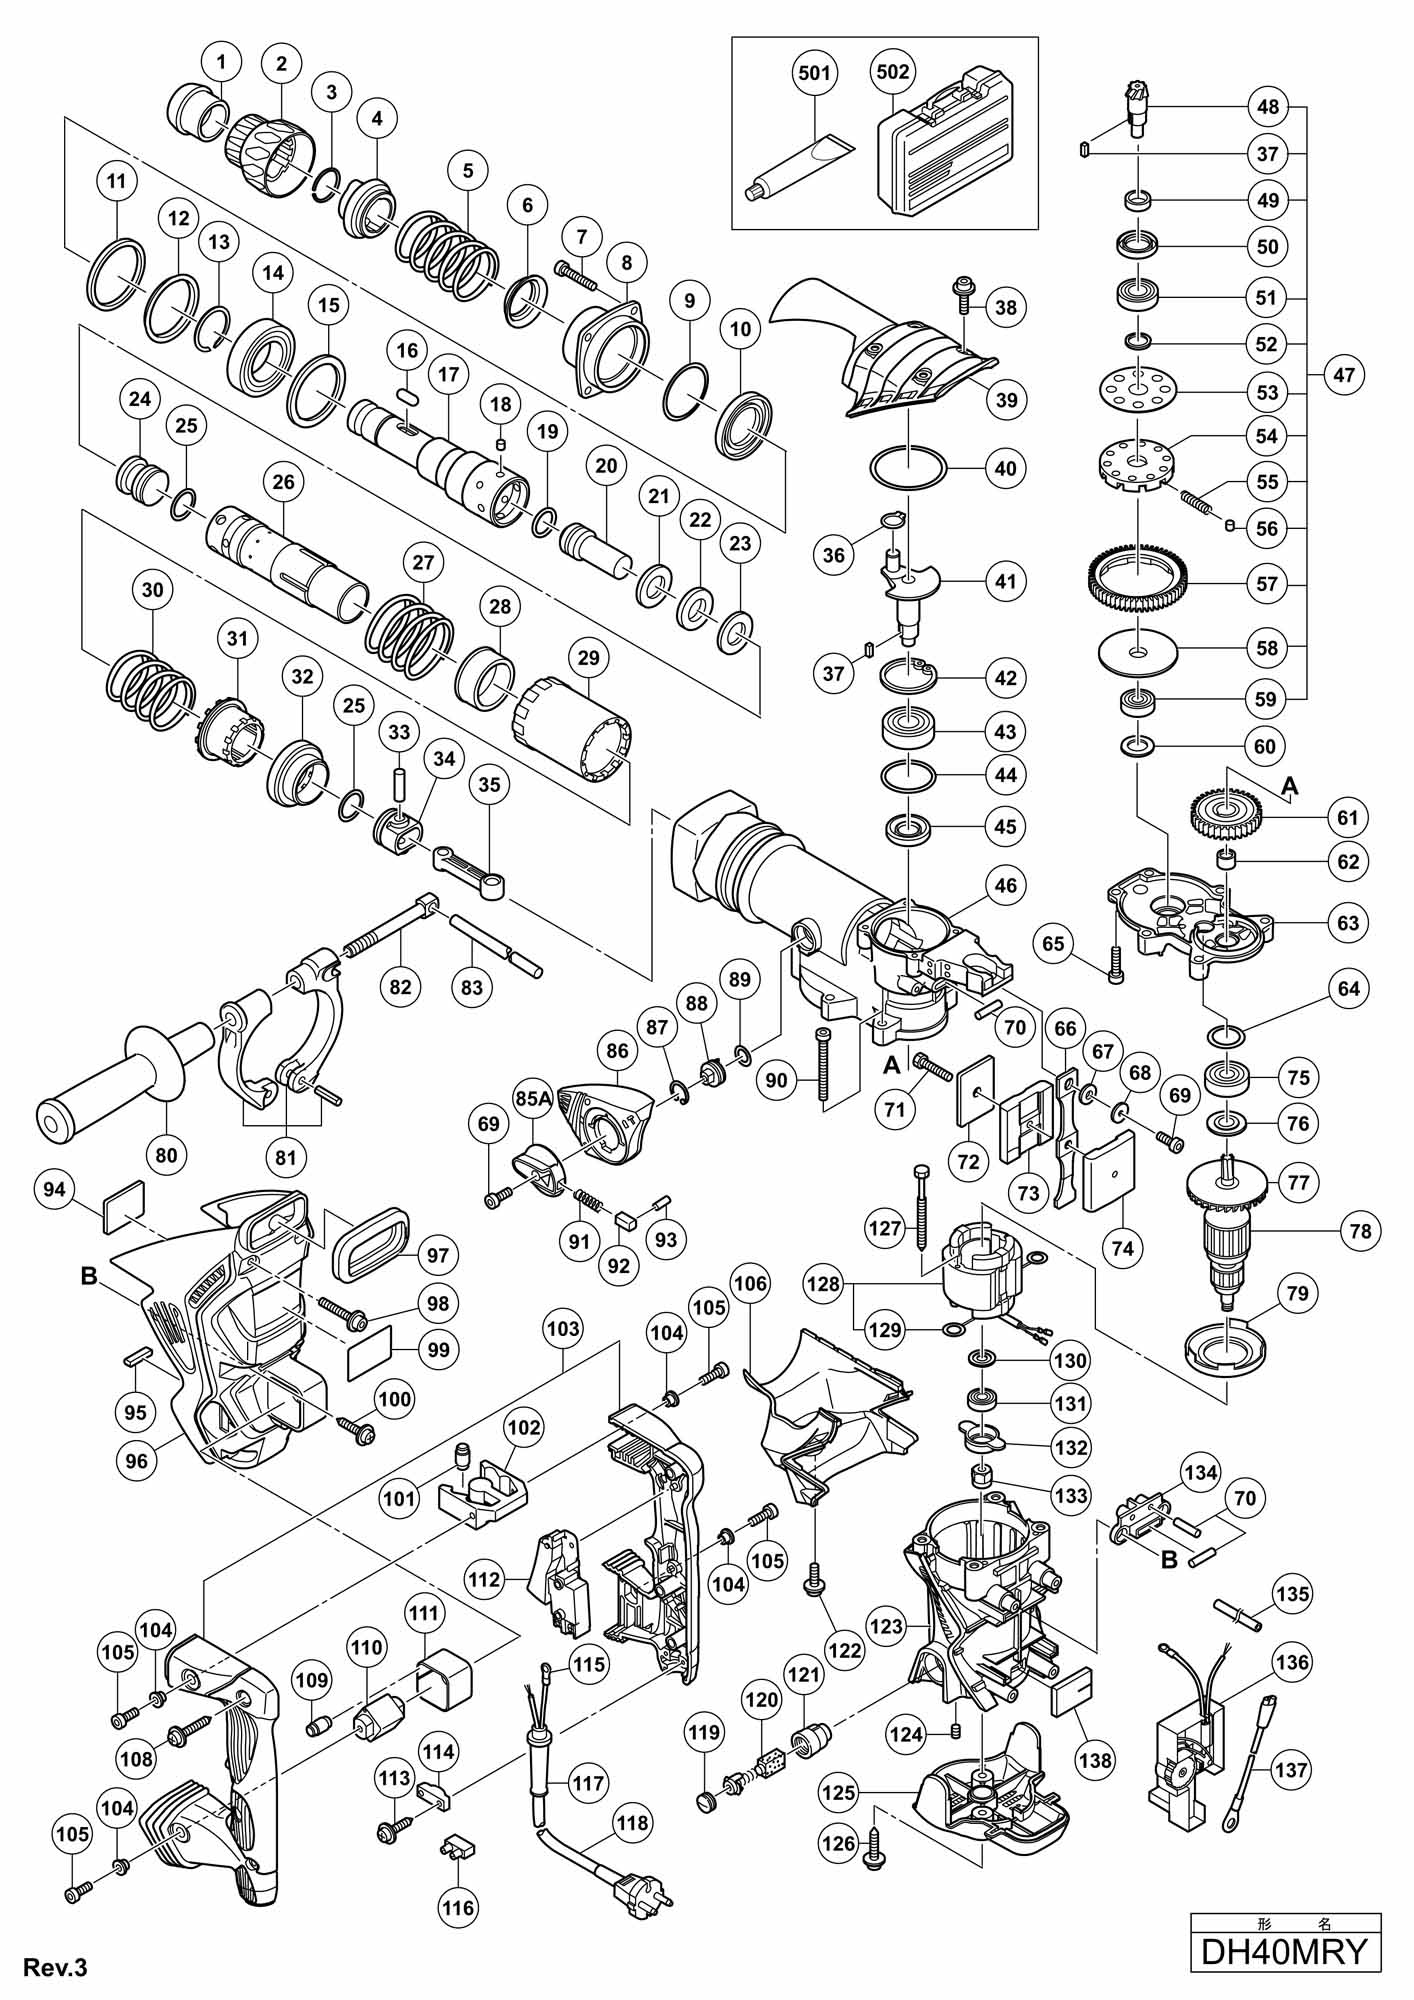 Image of Chuck spare part for Hitachi DH 40MRY